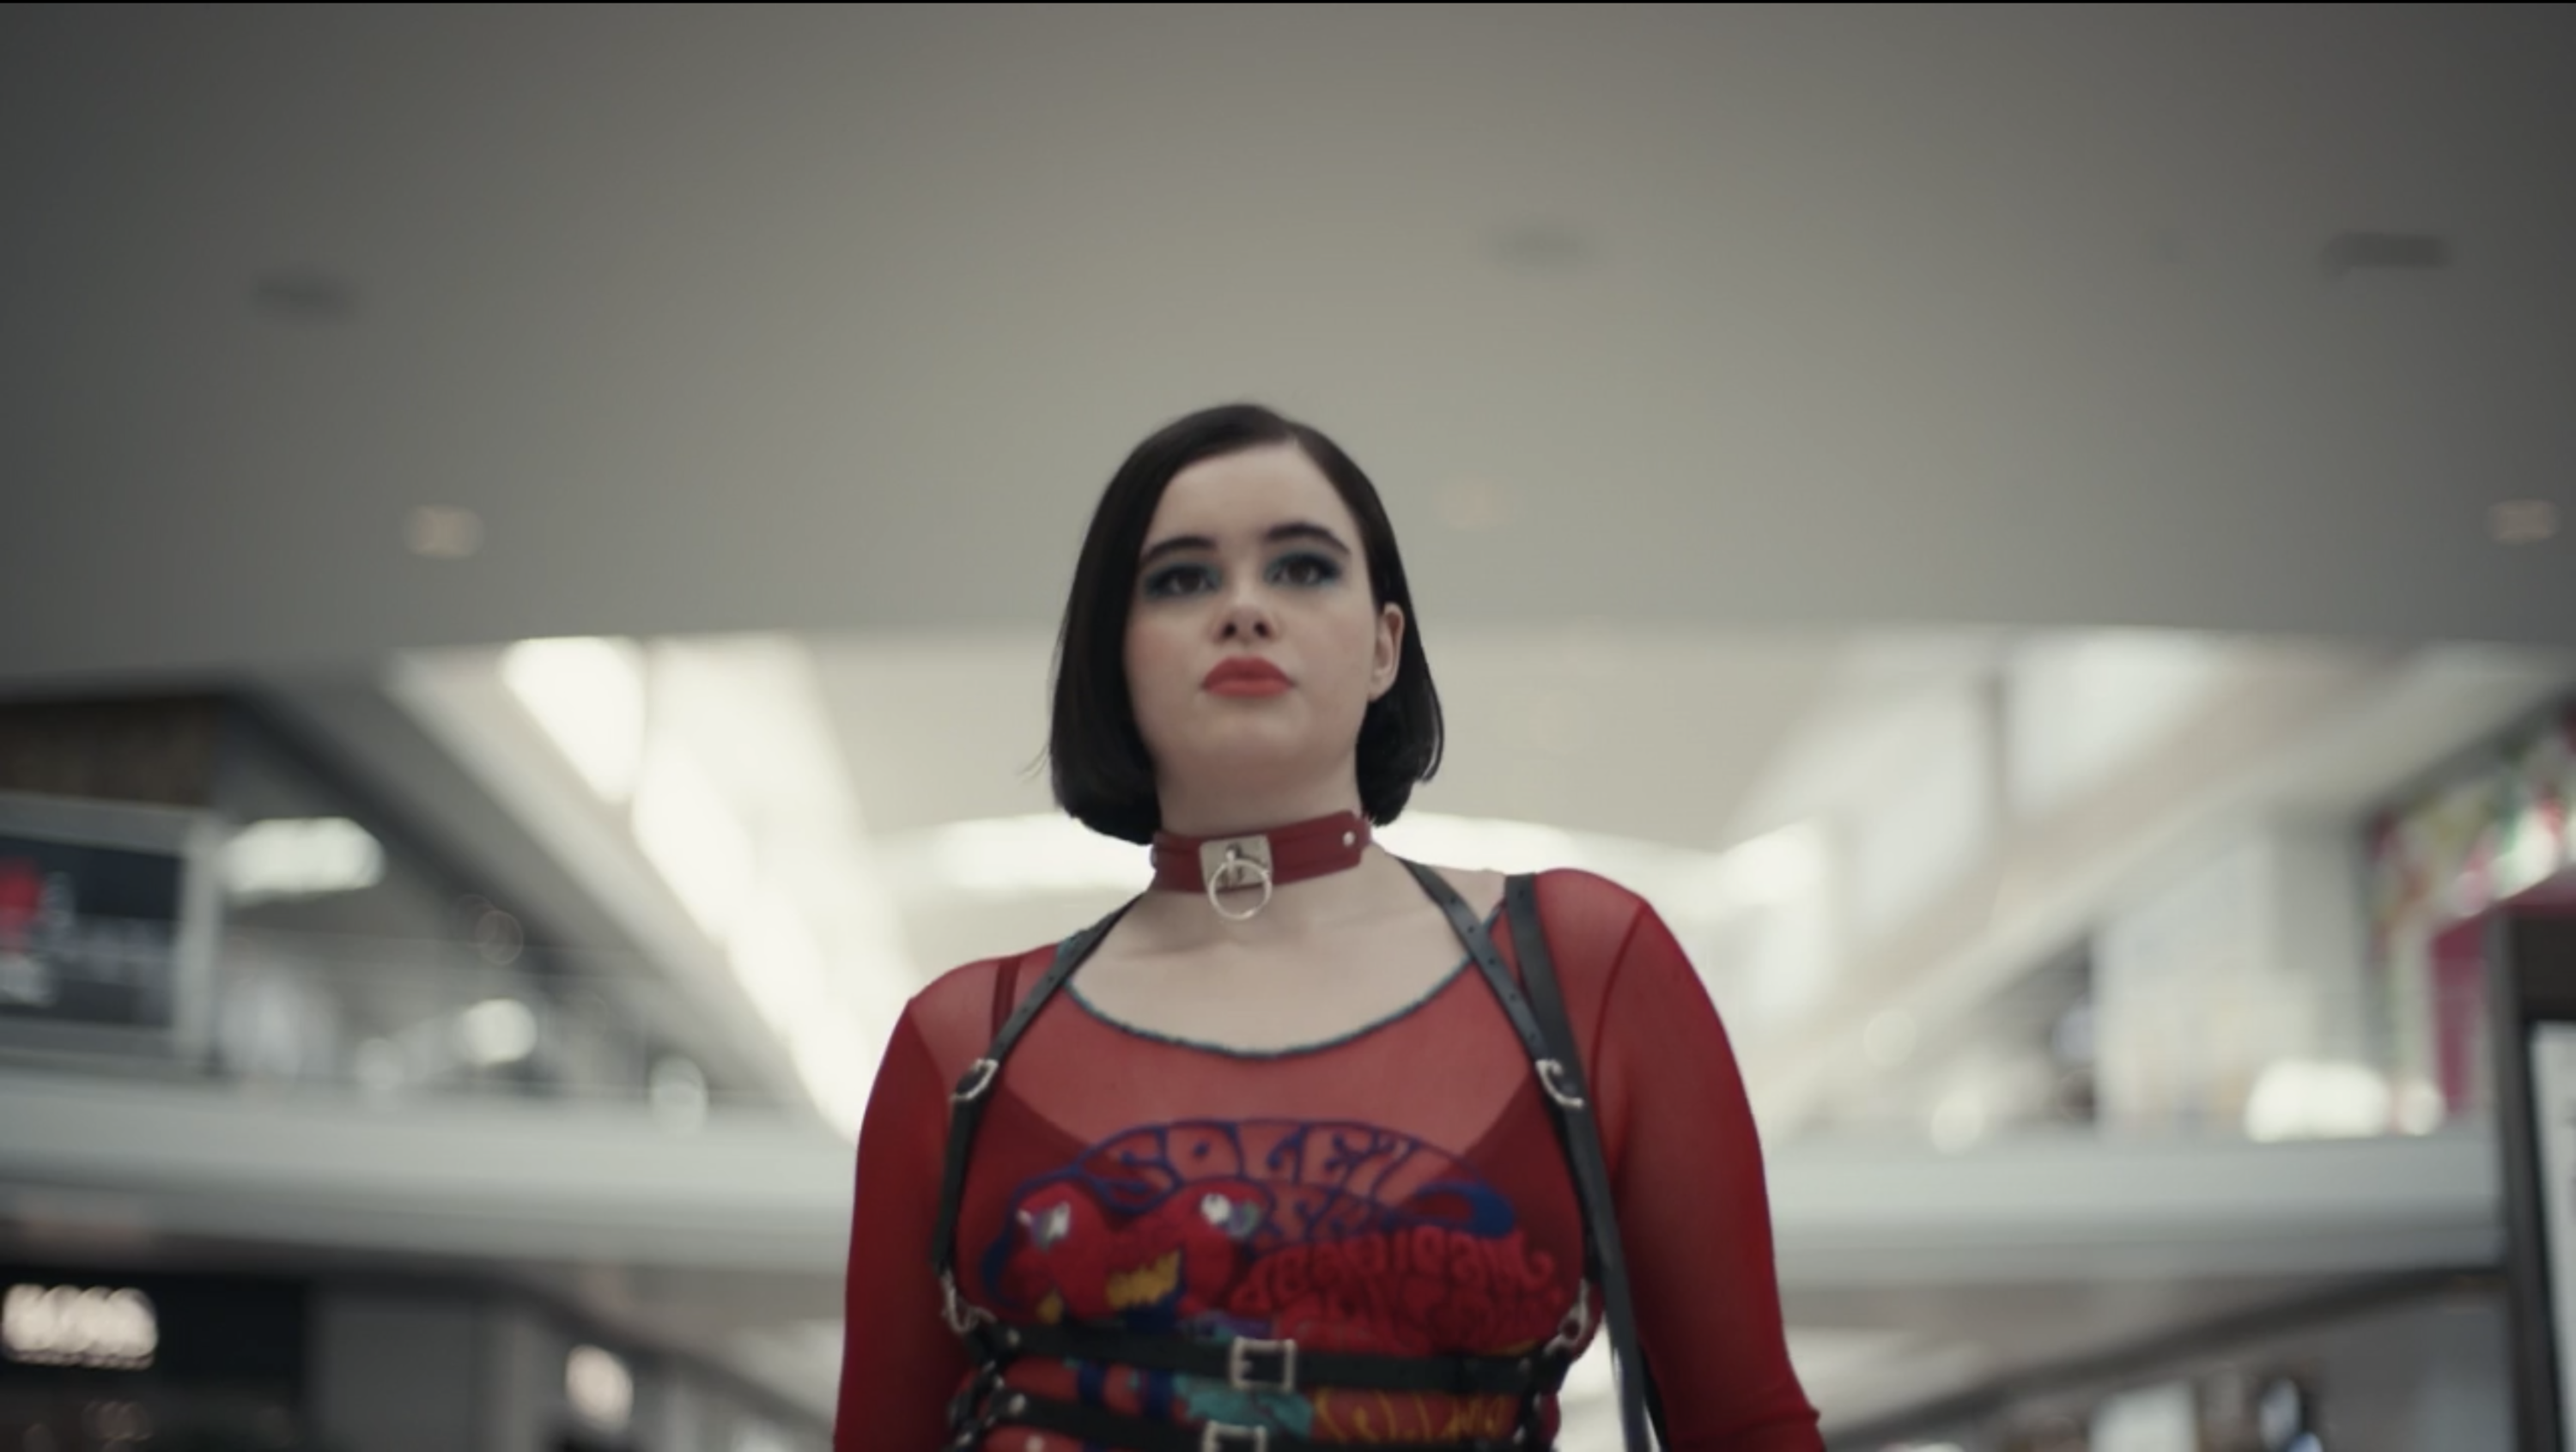 Barbie Ferreira as Kat in &quot;Euphoria&quot; walks confidently in the mall in sexy new clothes